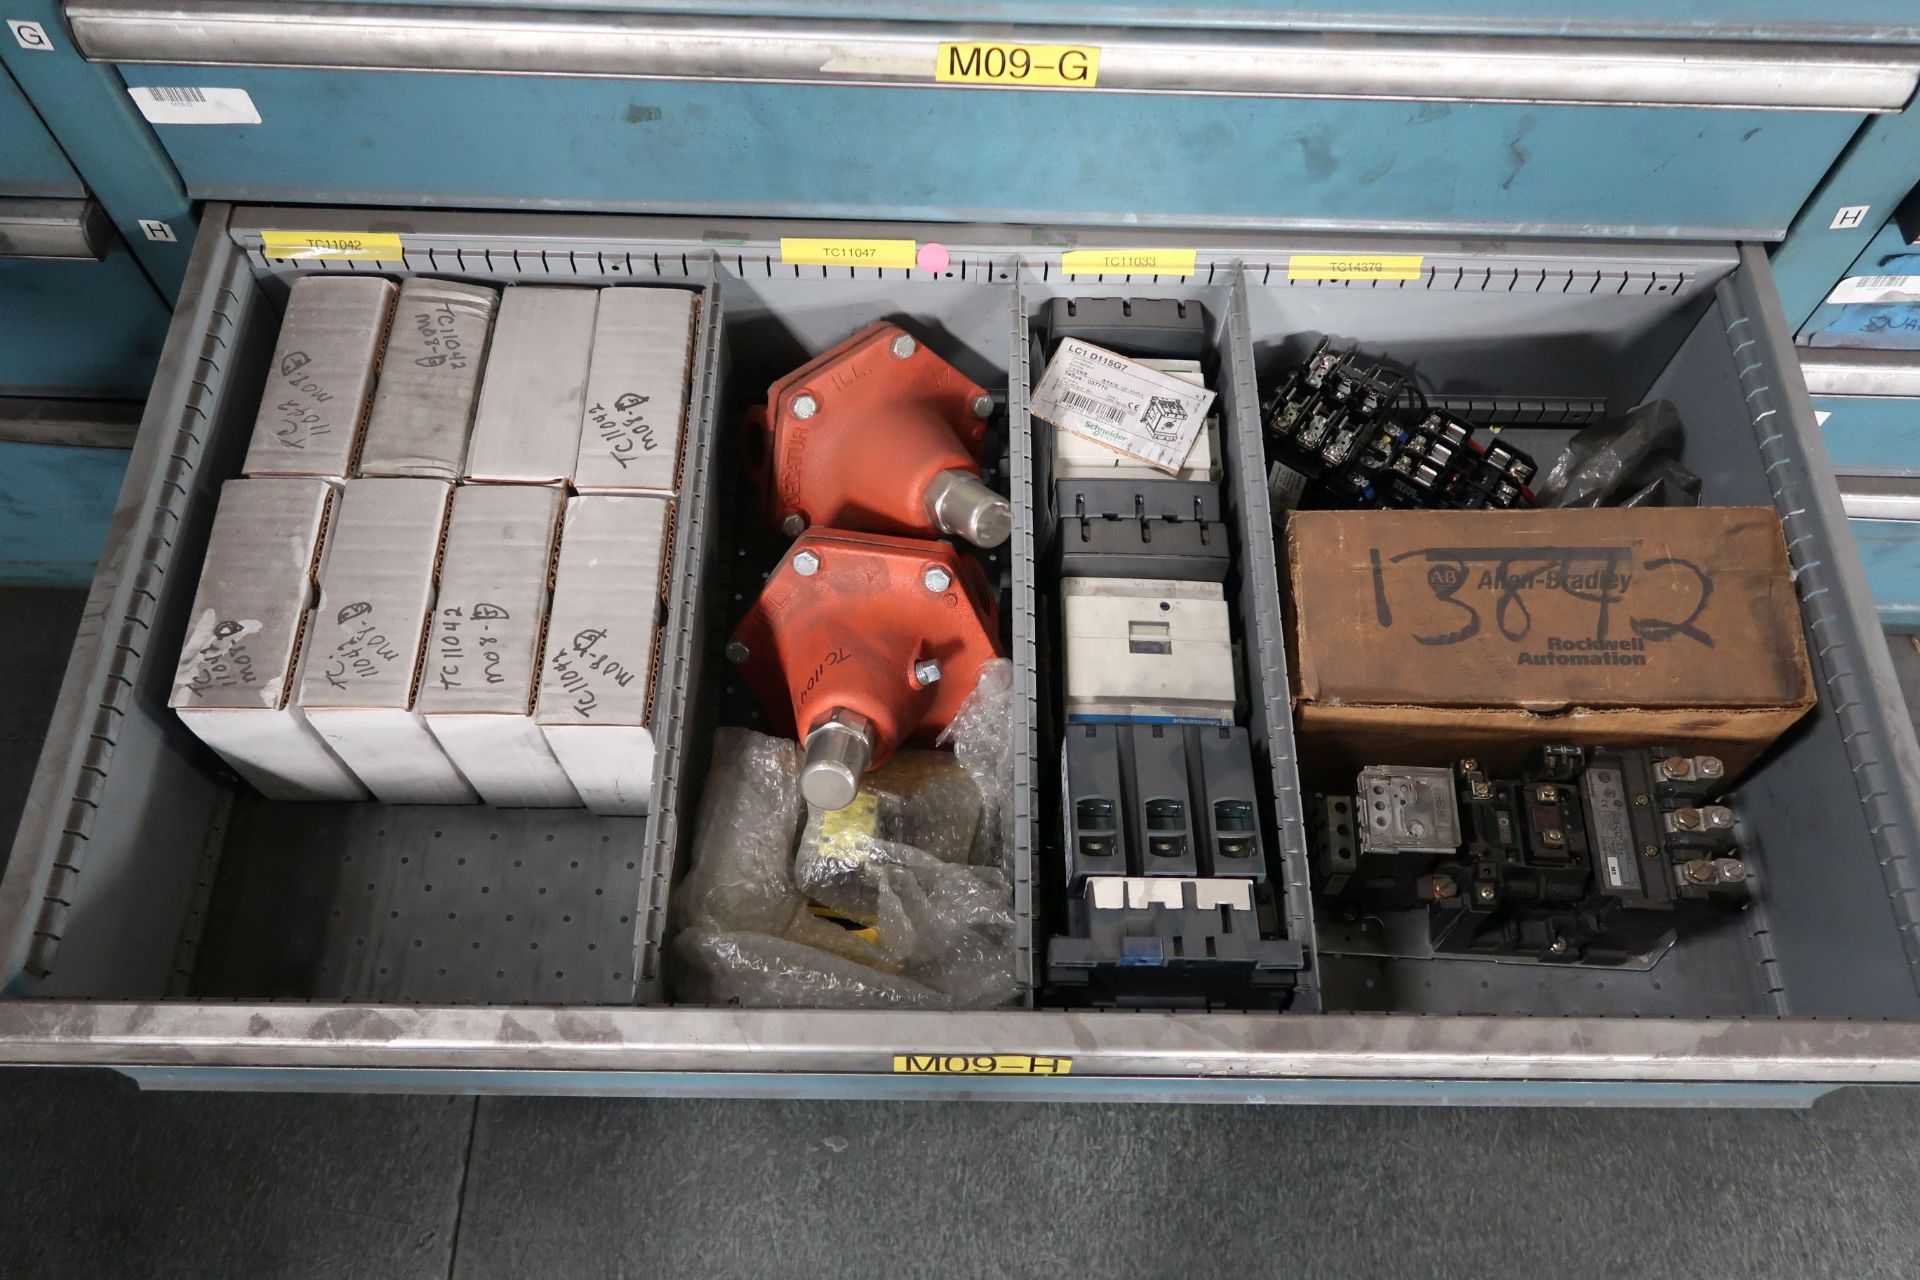 TOOLING CABINETS WITH CONTENTS - MOSTLY MACHINE PARTS **LOADING PRICE DUE TO ERRA - $2,000.00** - Image 56 of 59